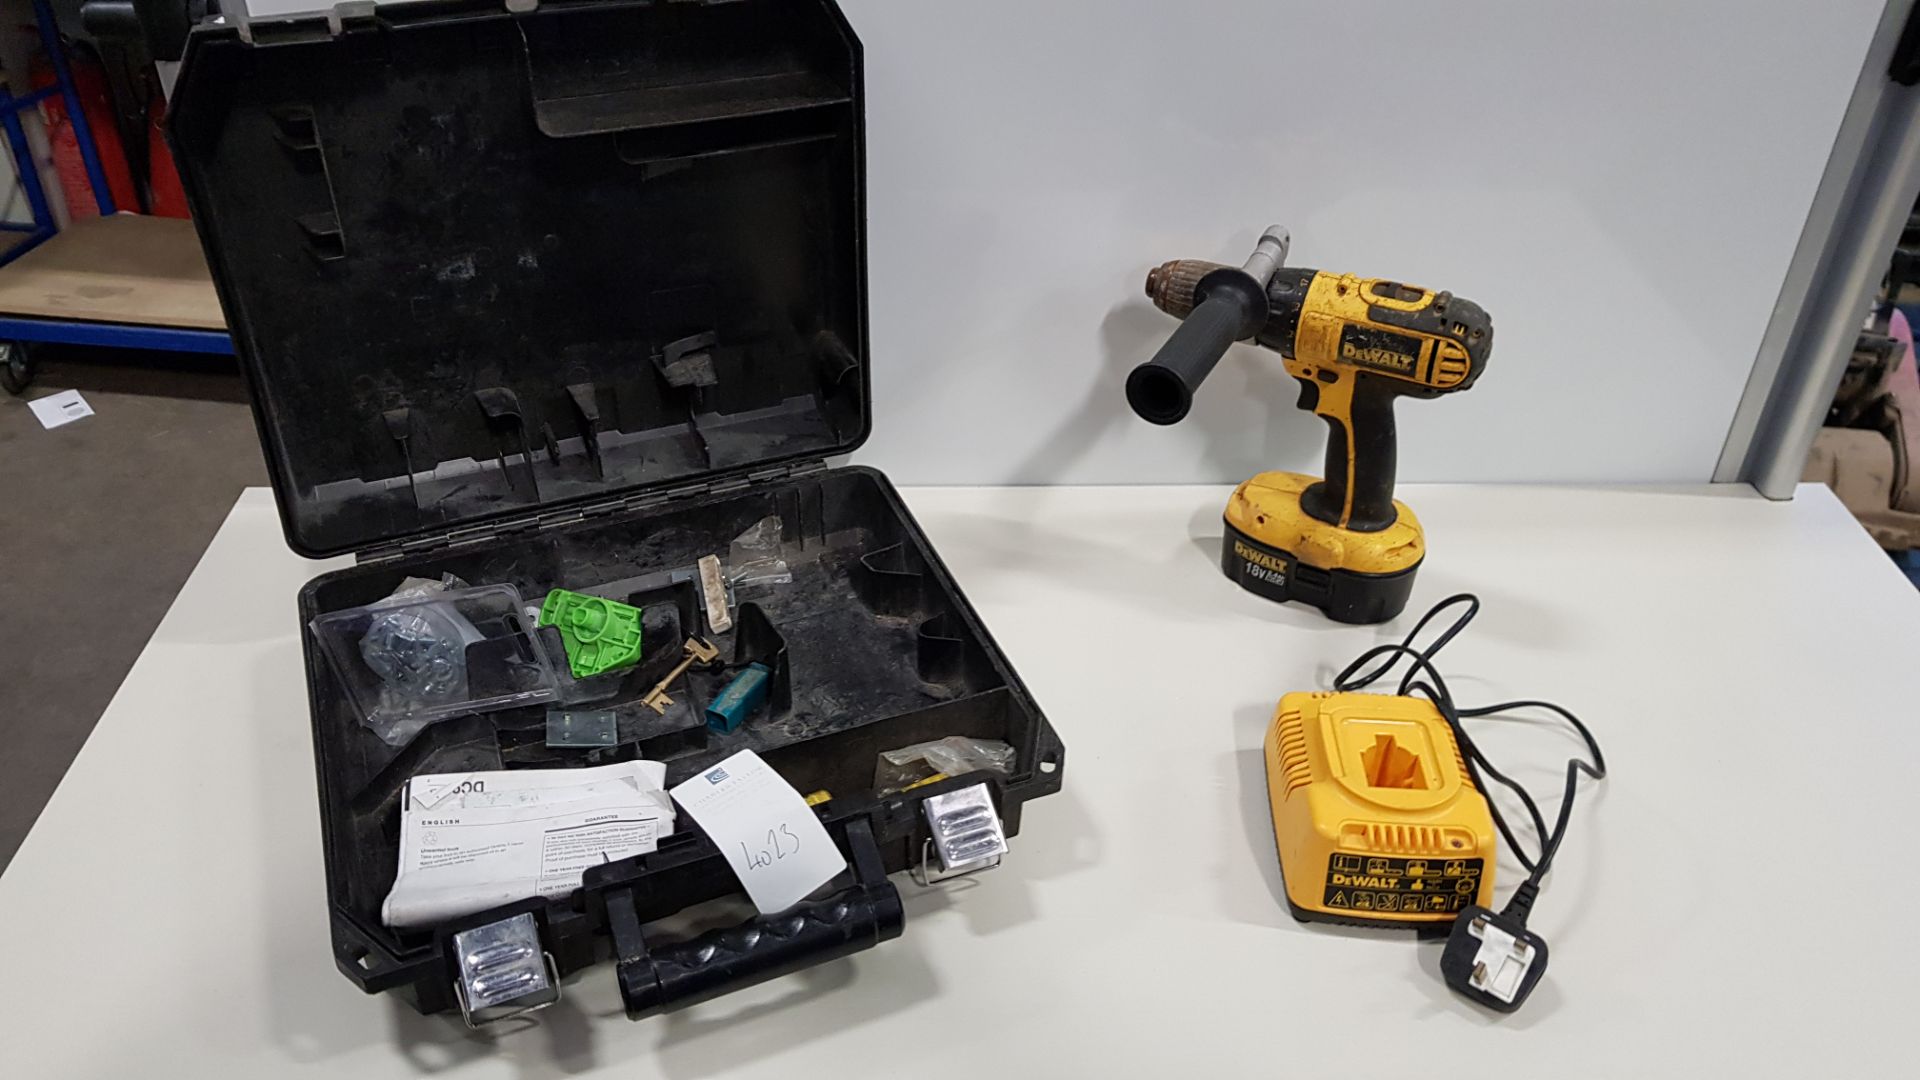 1 X DEWALT 18V BATTERY POWERED DRILL WITH CHARGER AND CASE